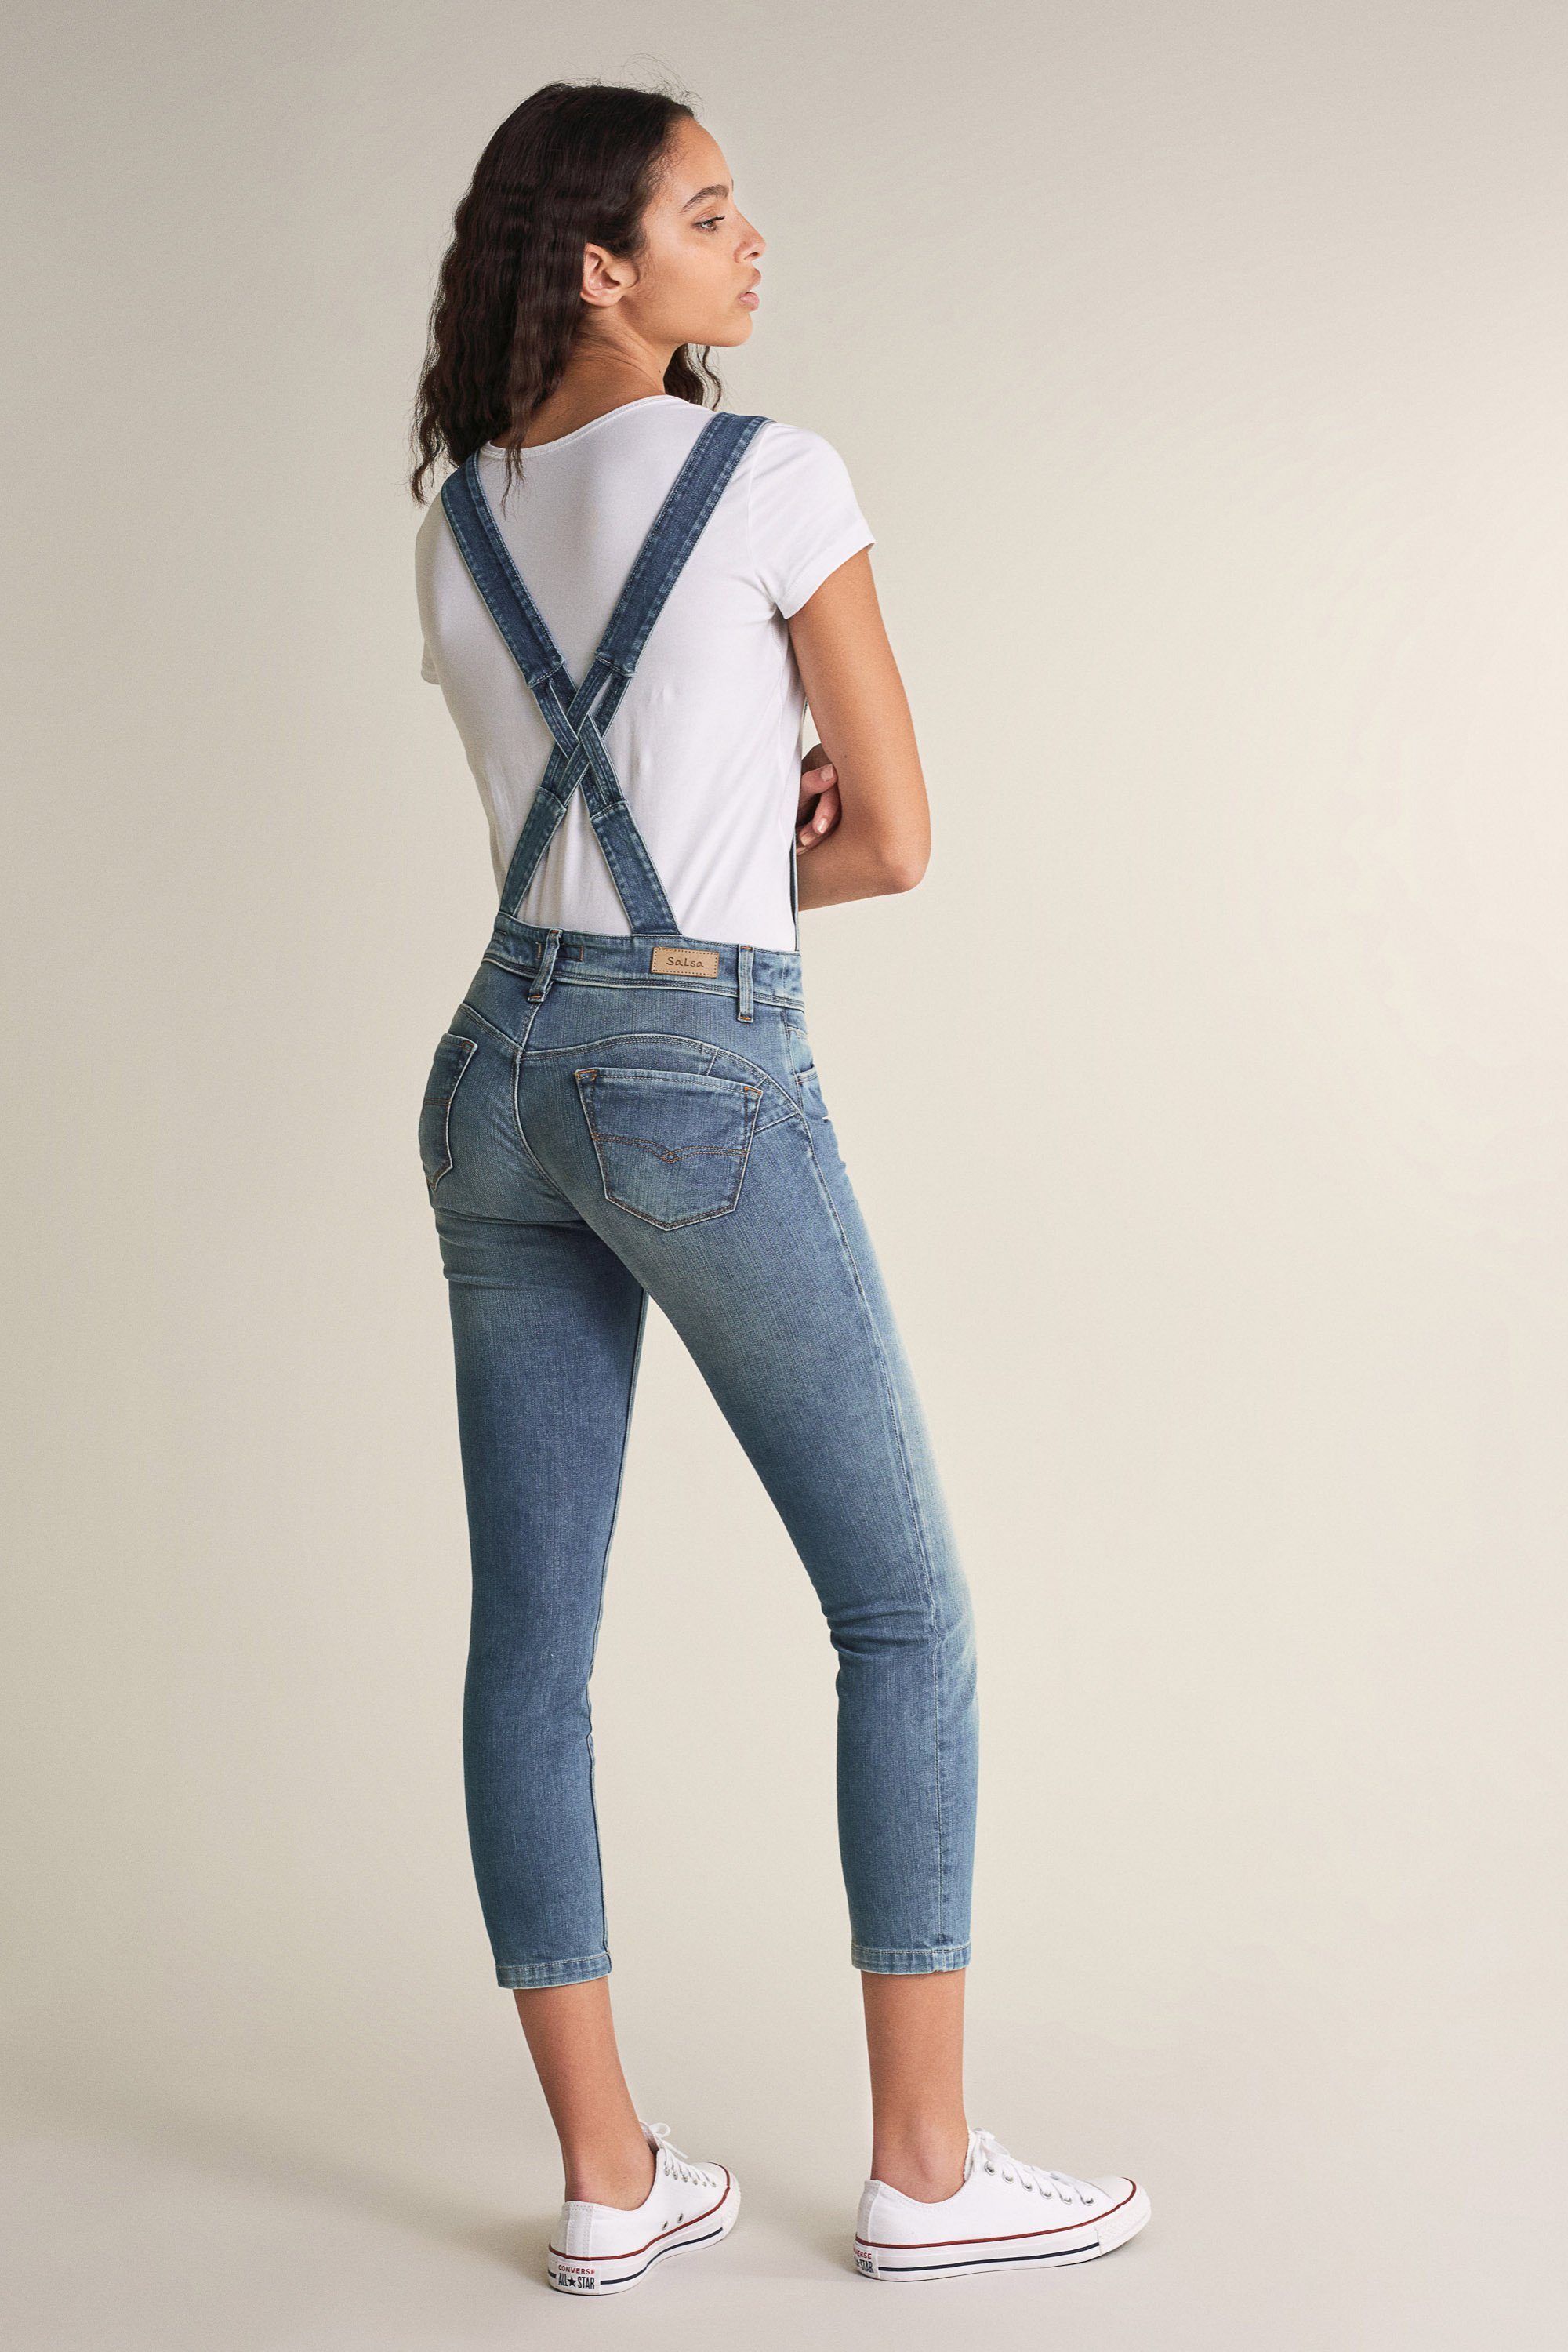 blue UP SALSA CAPRI JEANS Stretch-Jeans Salsa 124914.8503 out PUSH OVERALL washed WONDER